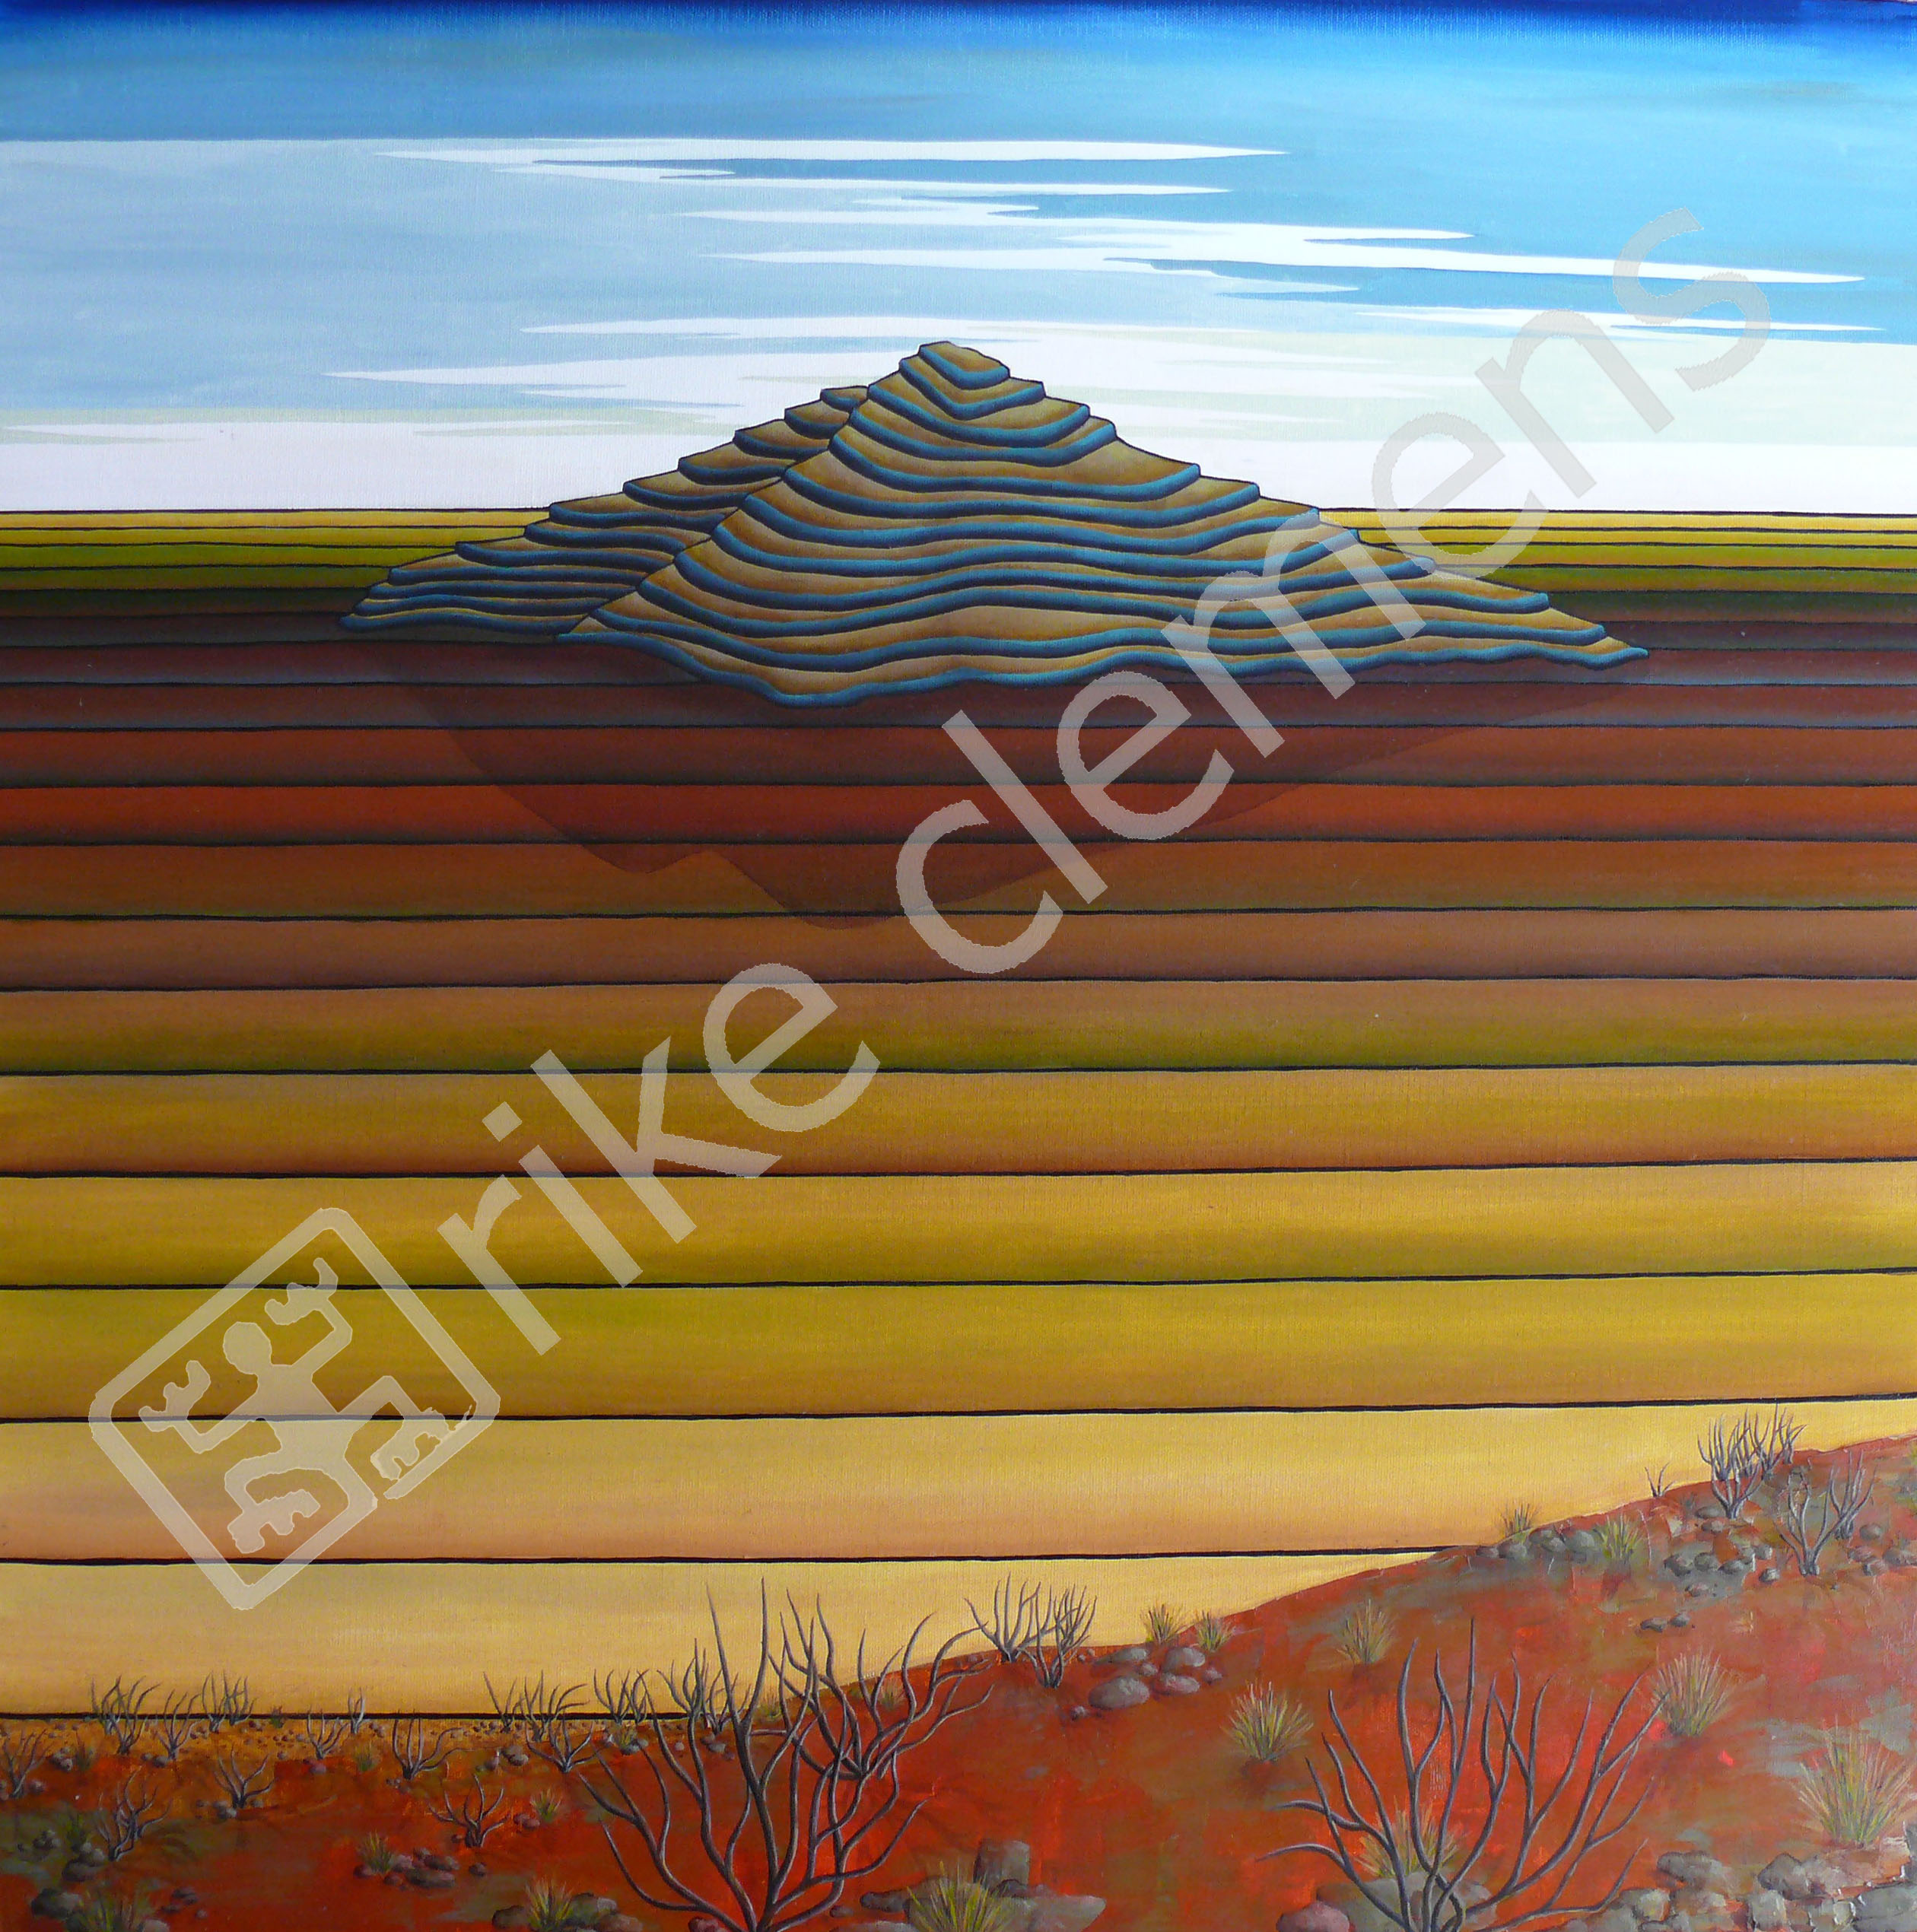 breakaway country, oil on canvas 2009 (70x70)